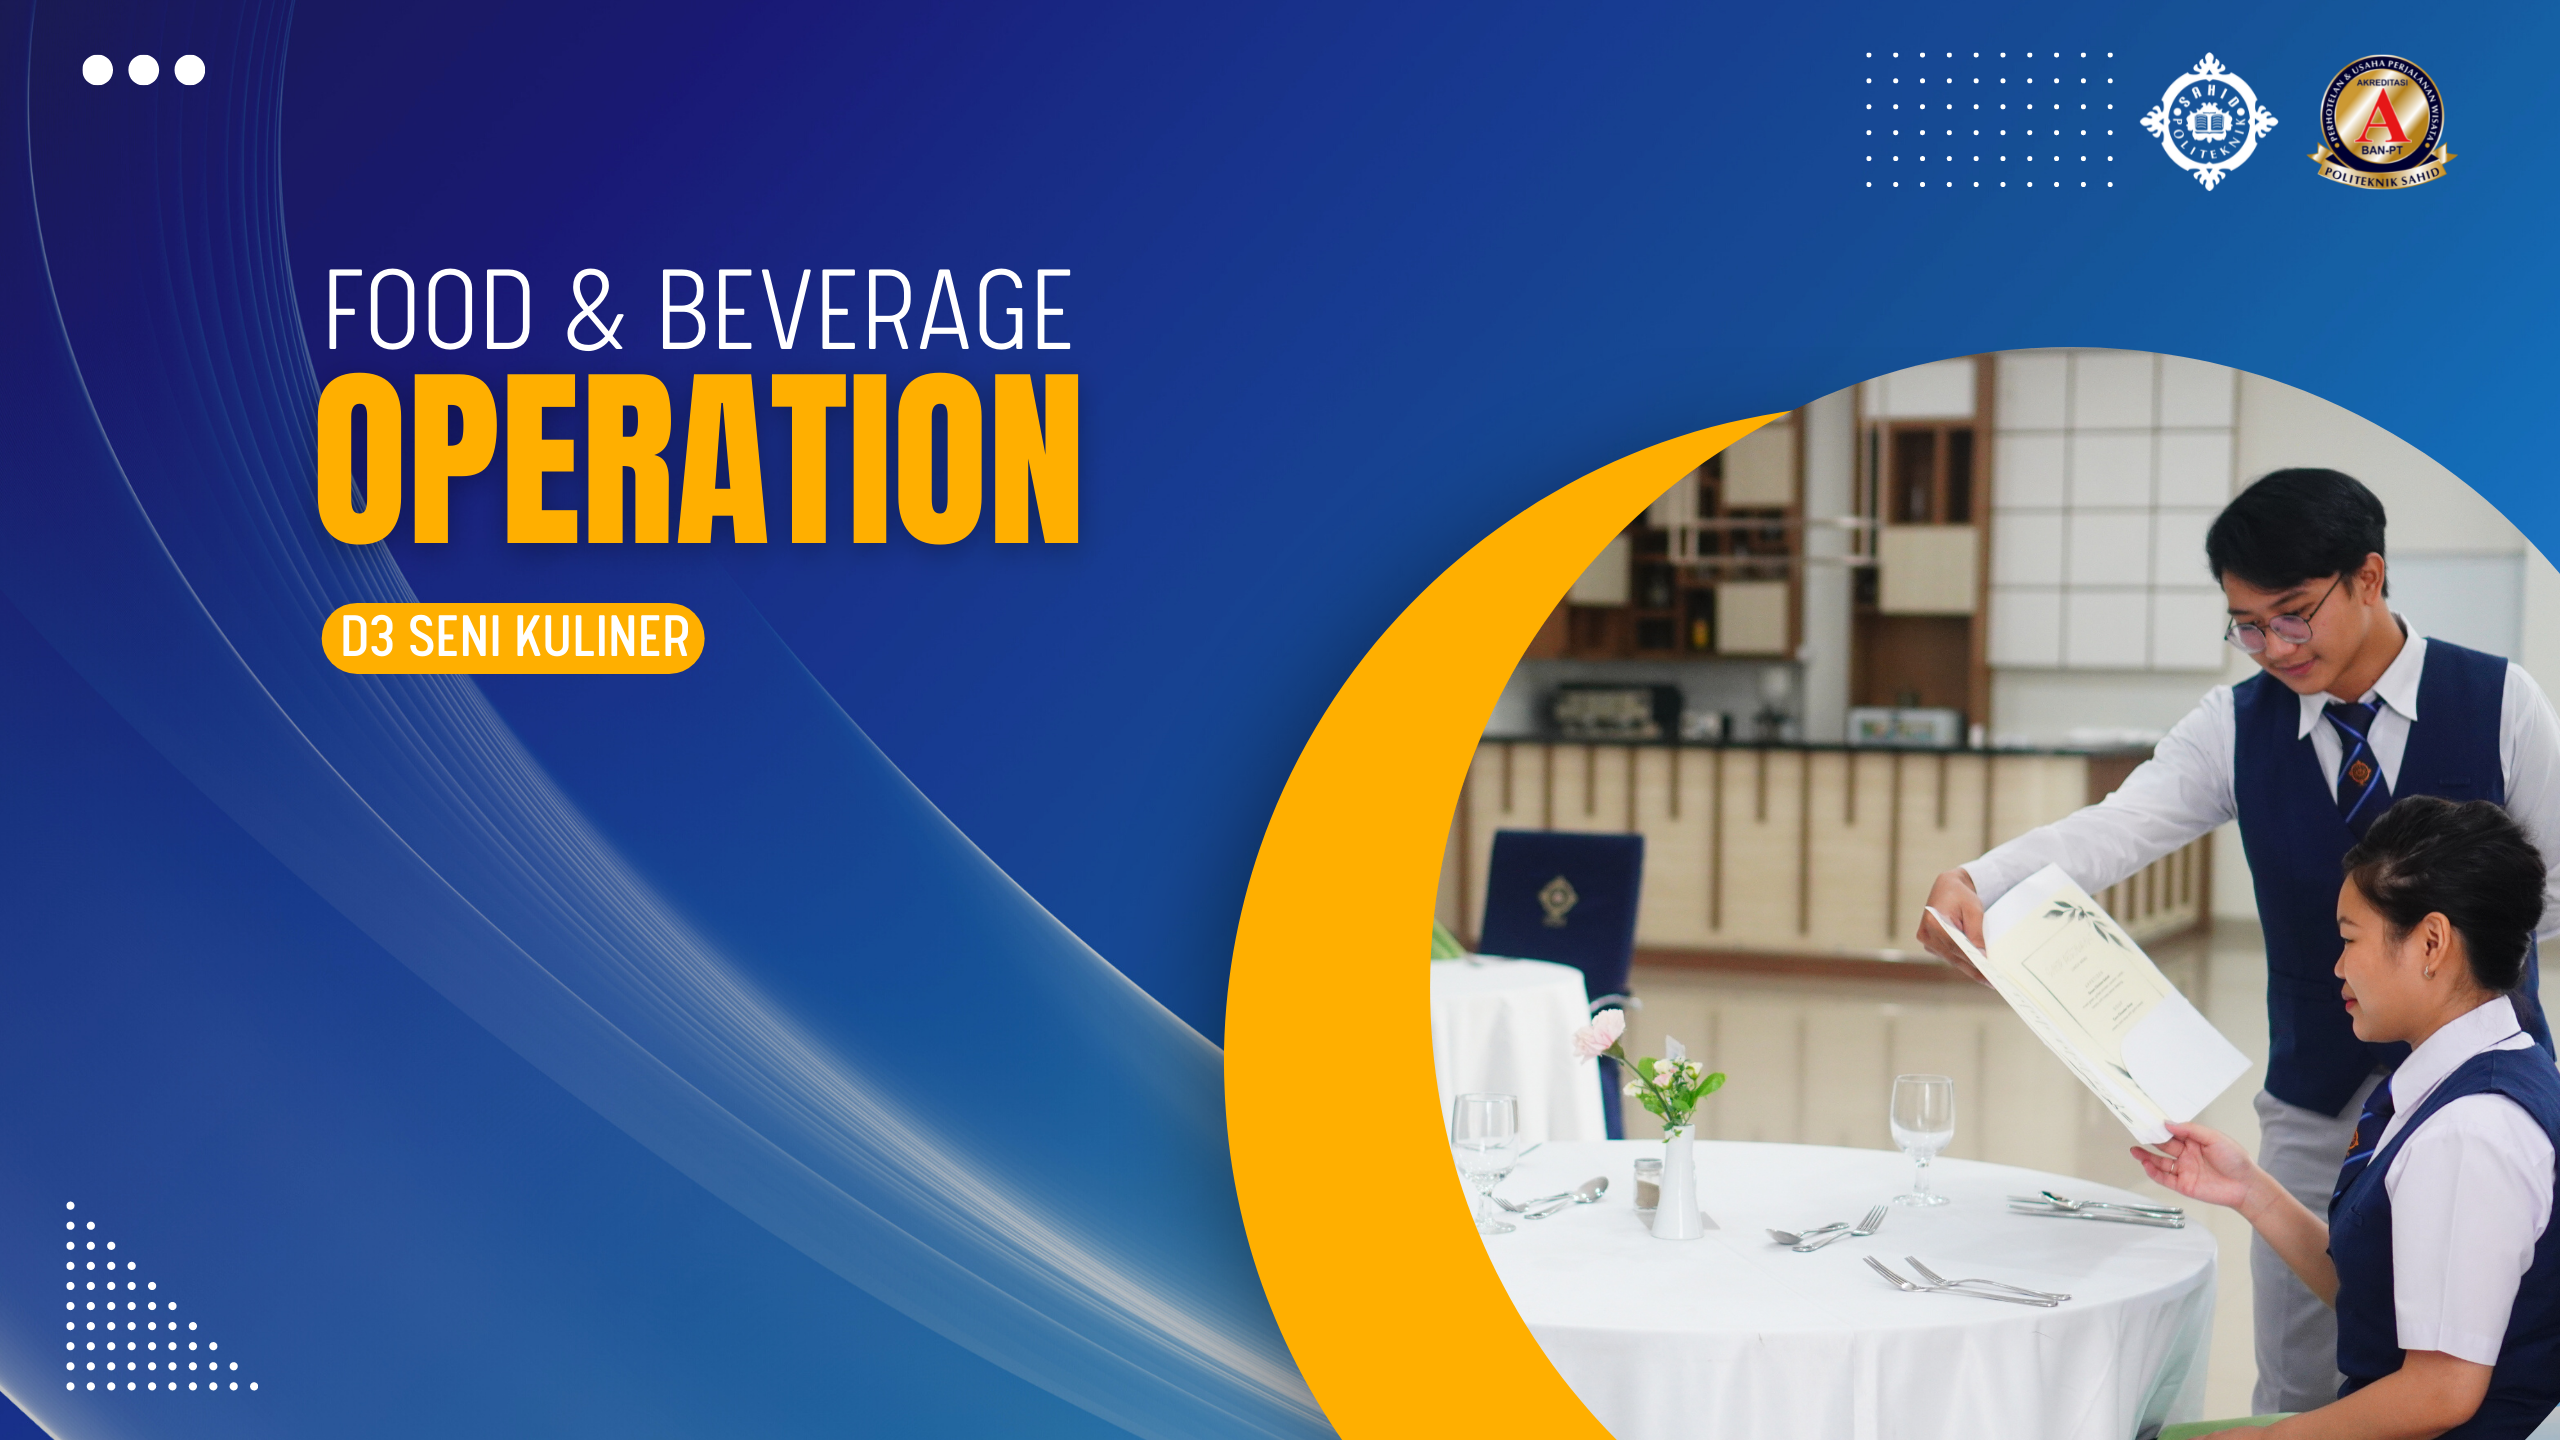 FOOD AND BEVERAGE OPERATIONS